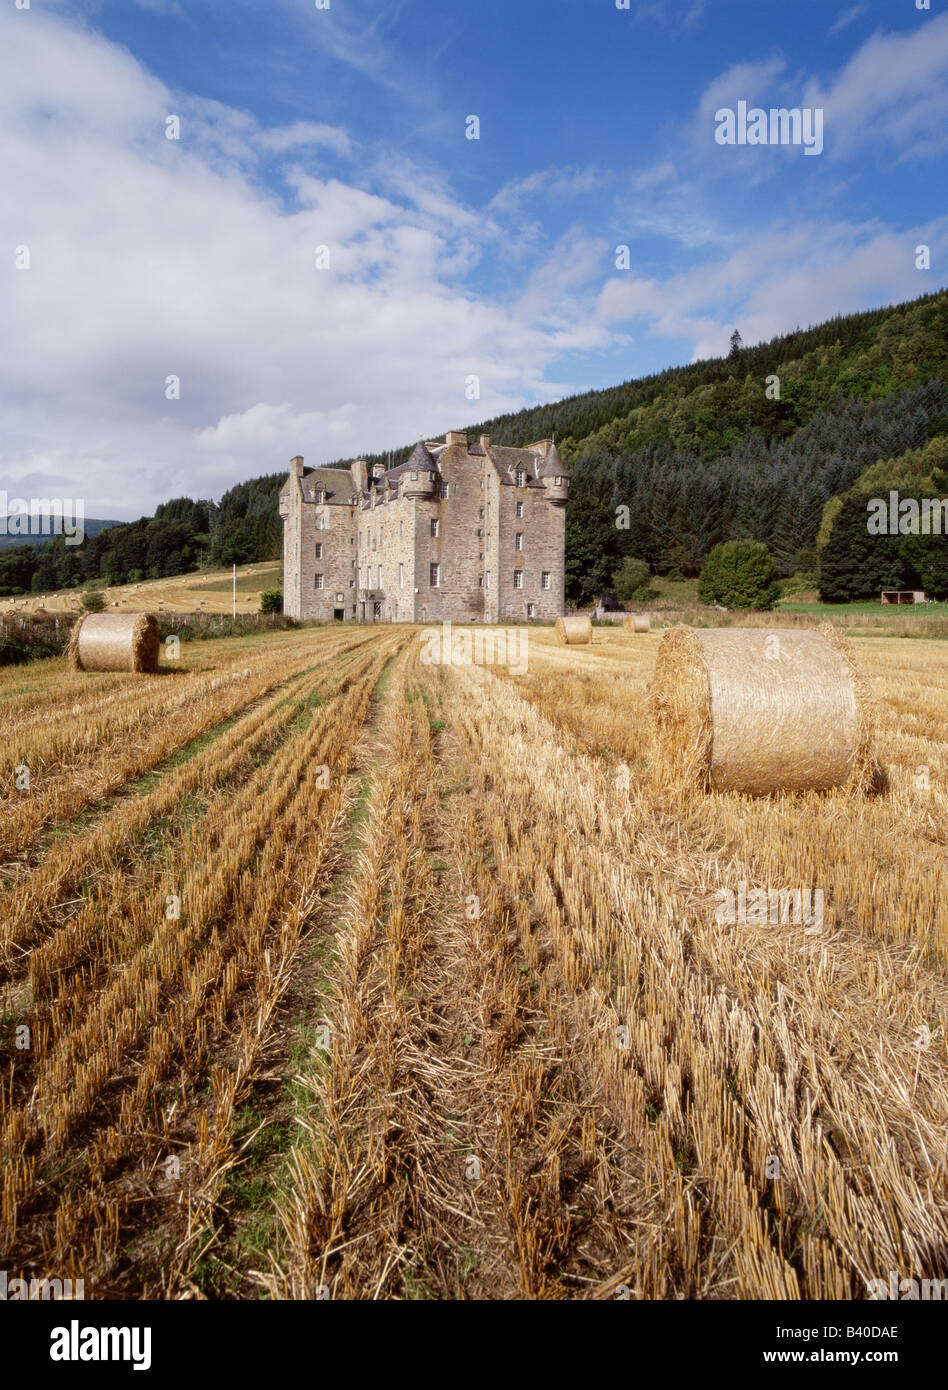 dh  MENZIES CASTLE PERTHSHIRE Highlander clan laird house castle home field and harvested bales scotland highlands lairds family highland fields Stock Photo